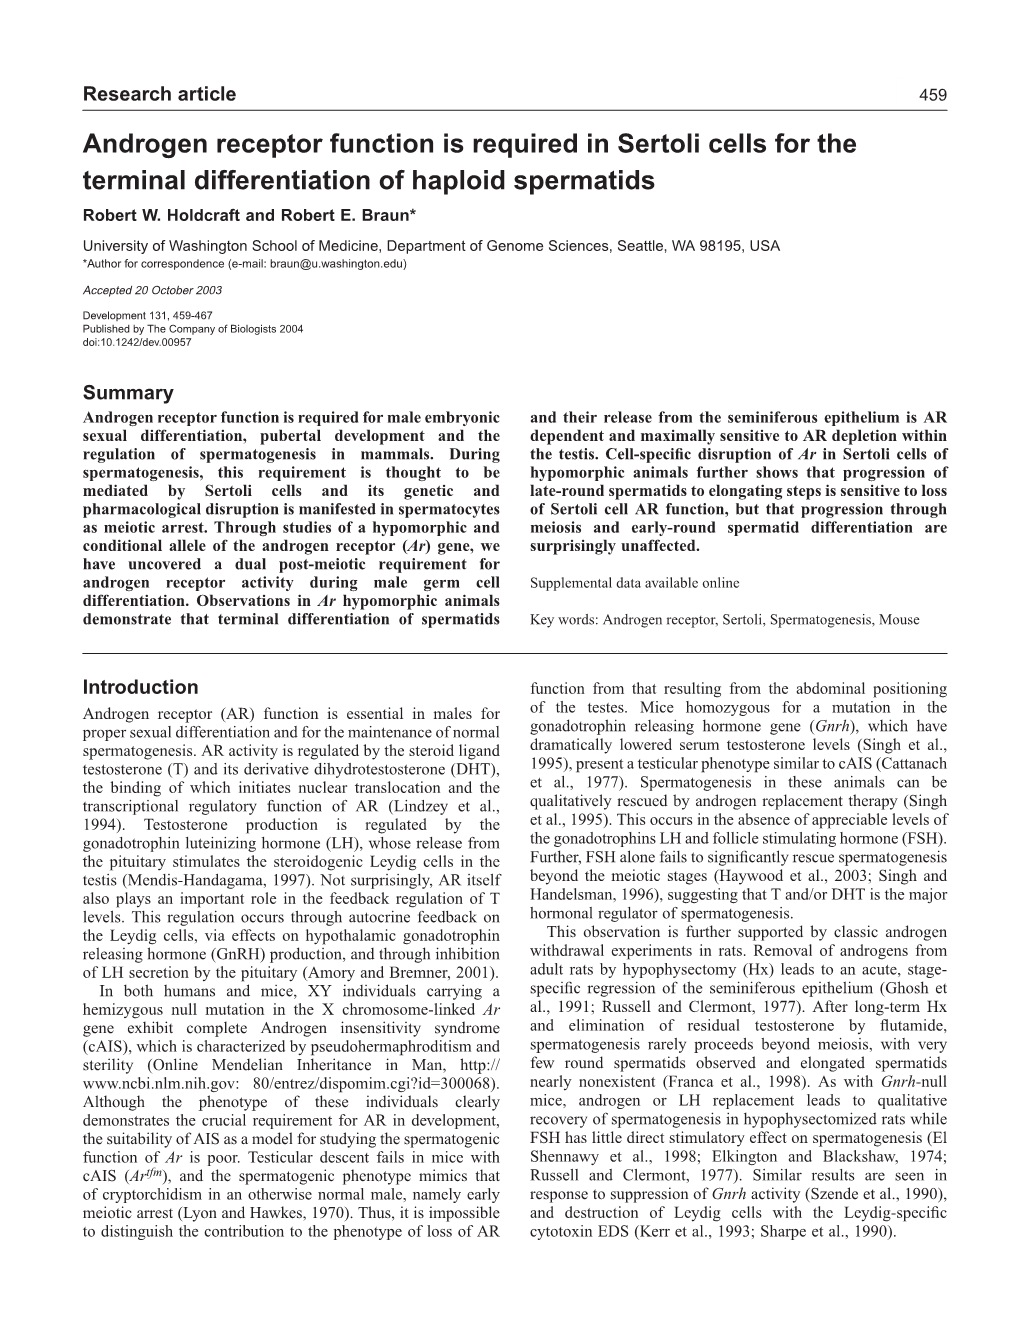 Androgen Receptor Function Is Required in Sertoli Cells for the Terminal Differentiation of Haploid Spermatids Robert W